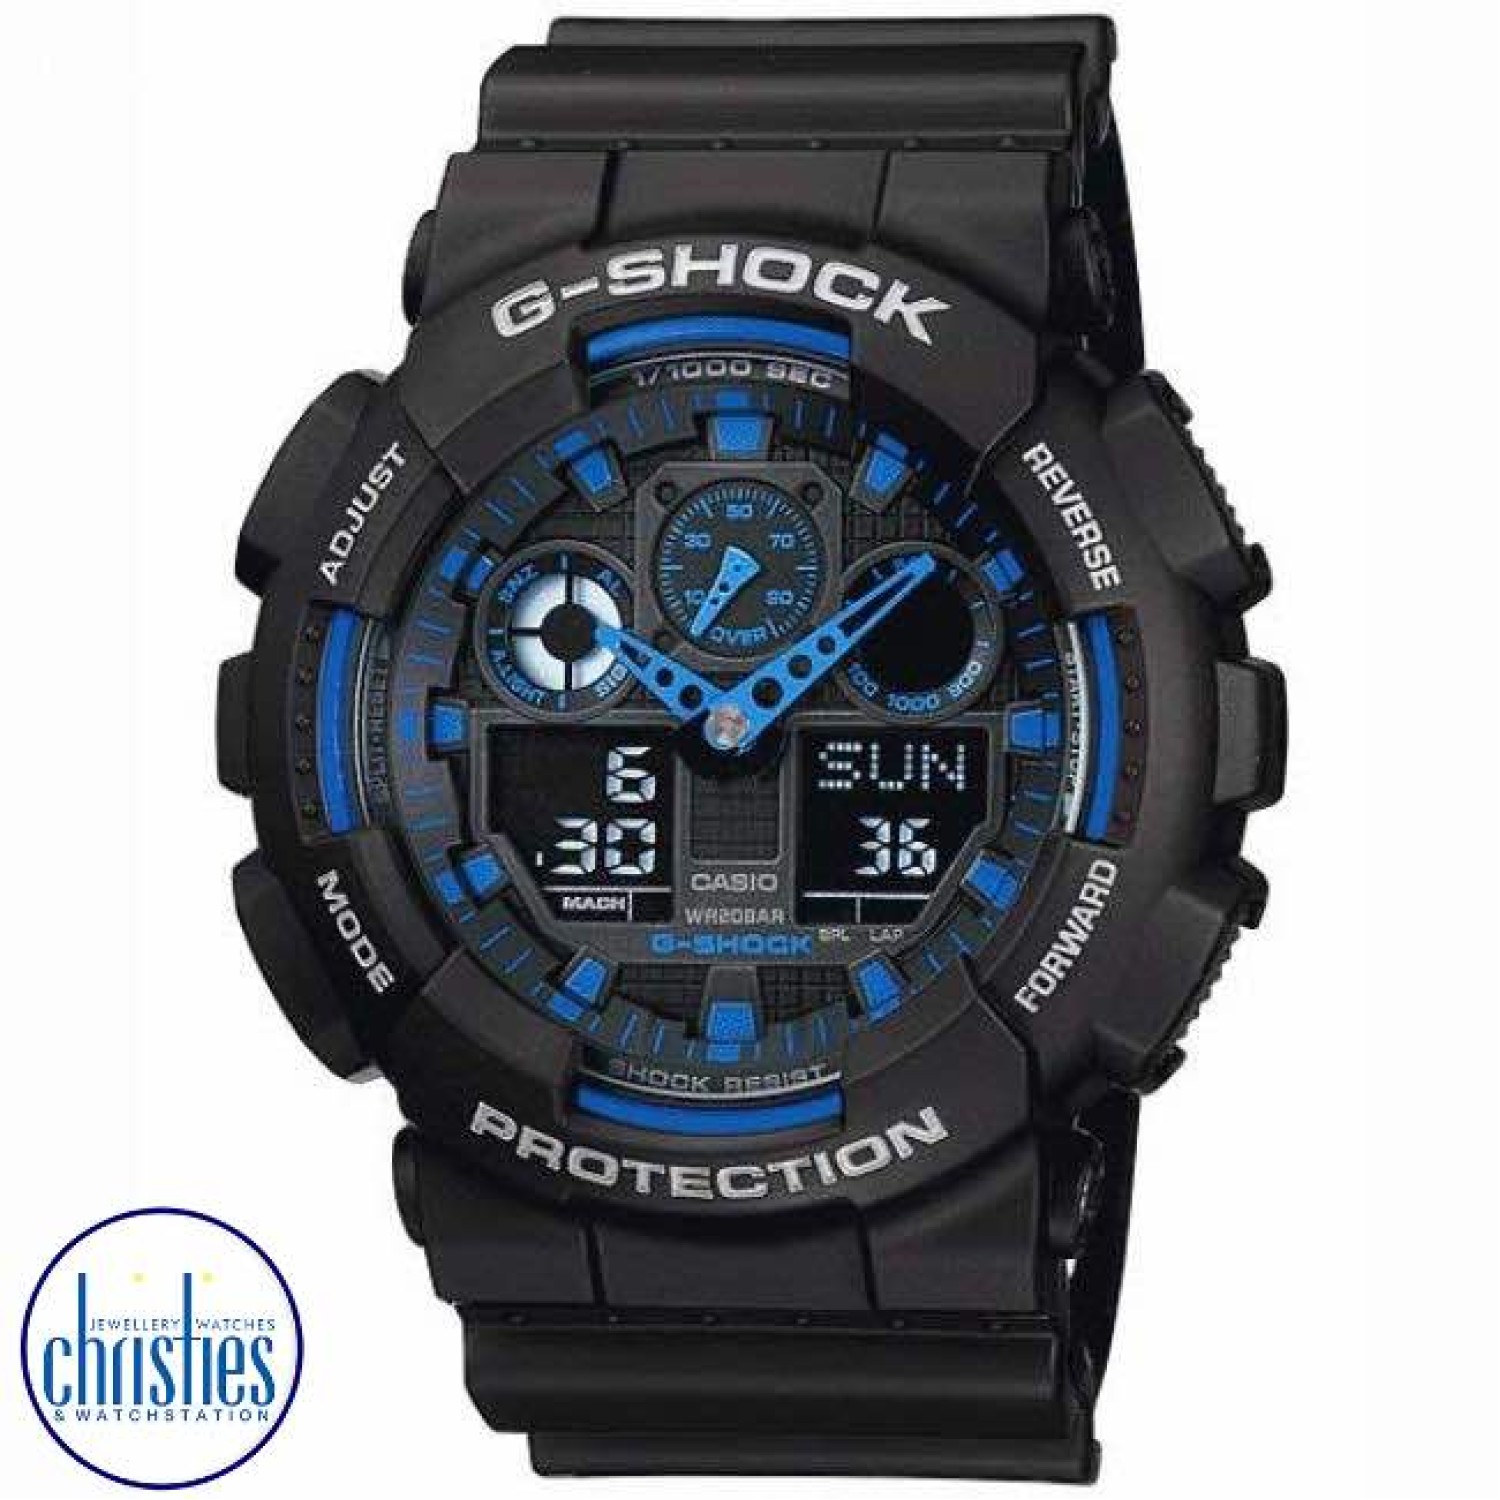 GA100-1A2 G-Shock Super Dual Illuminator Watch. There’s a reason why they call G-Shock the toughest watch in the world and these are just some of the many examples. Mud & Shock Resistant, 200M WR, Super Dual Illuminator and 48-city world time…the miss